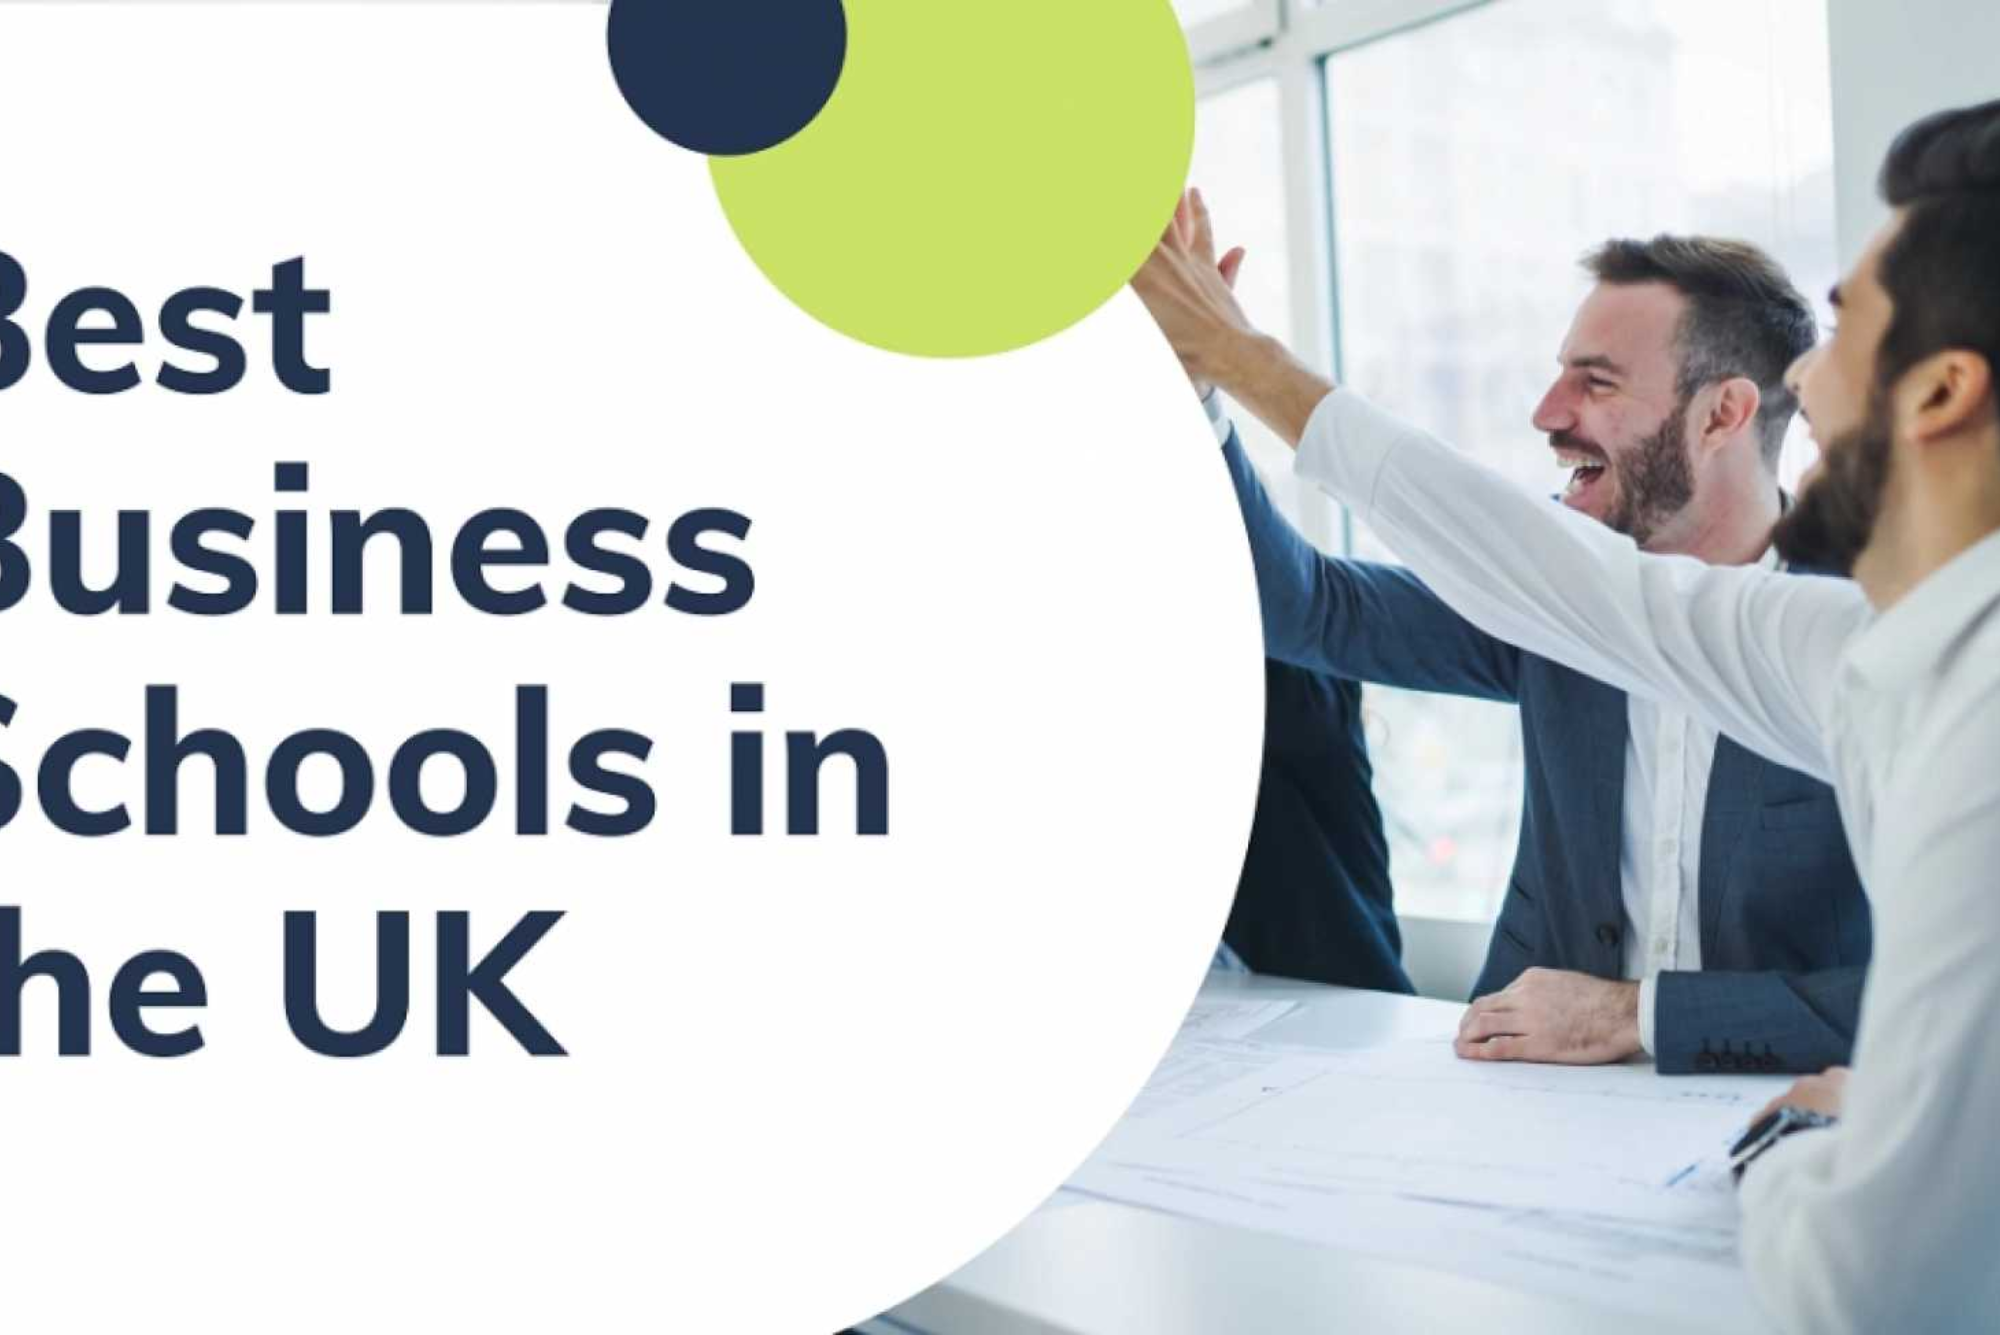 Top Business School for International Students